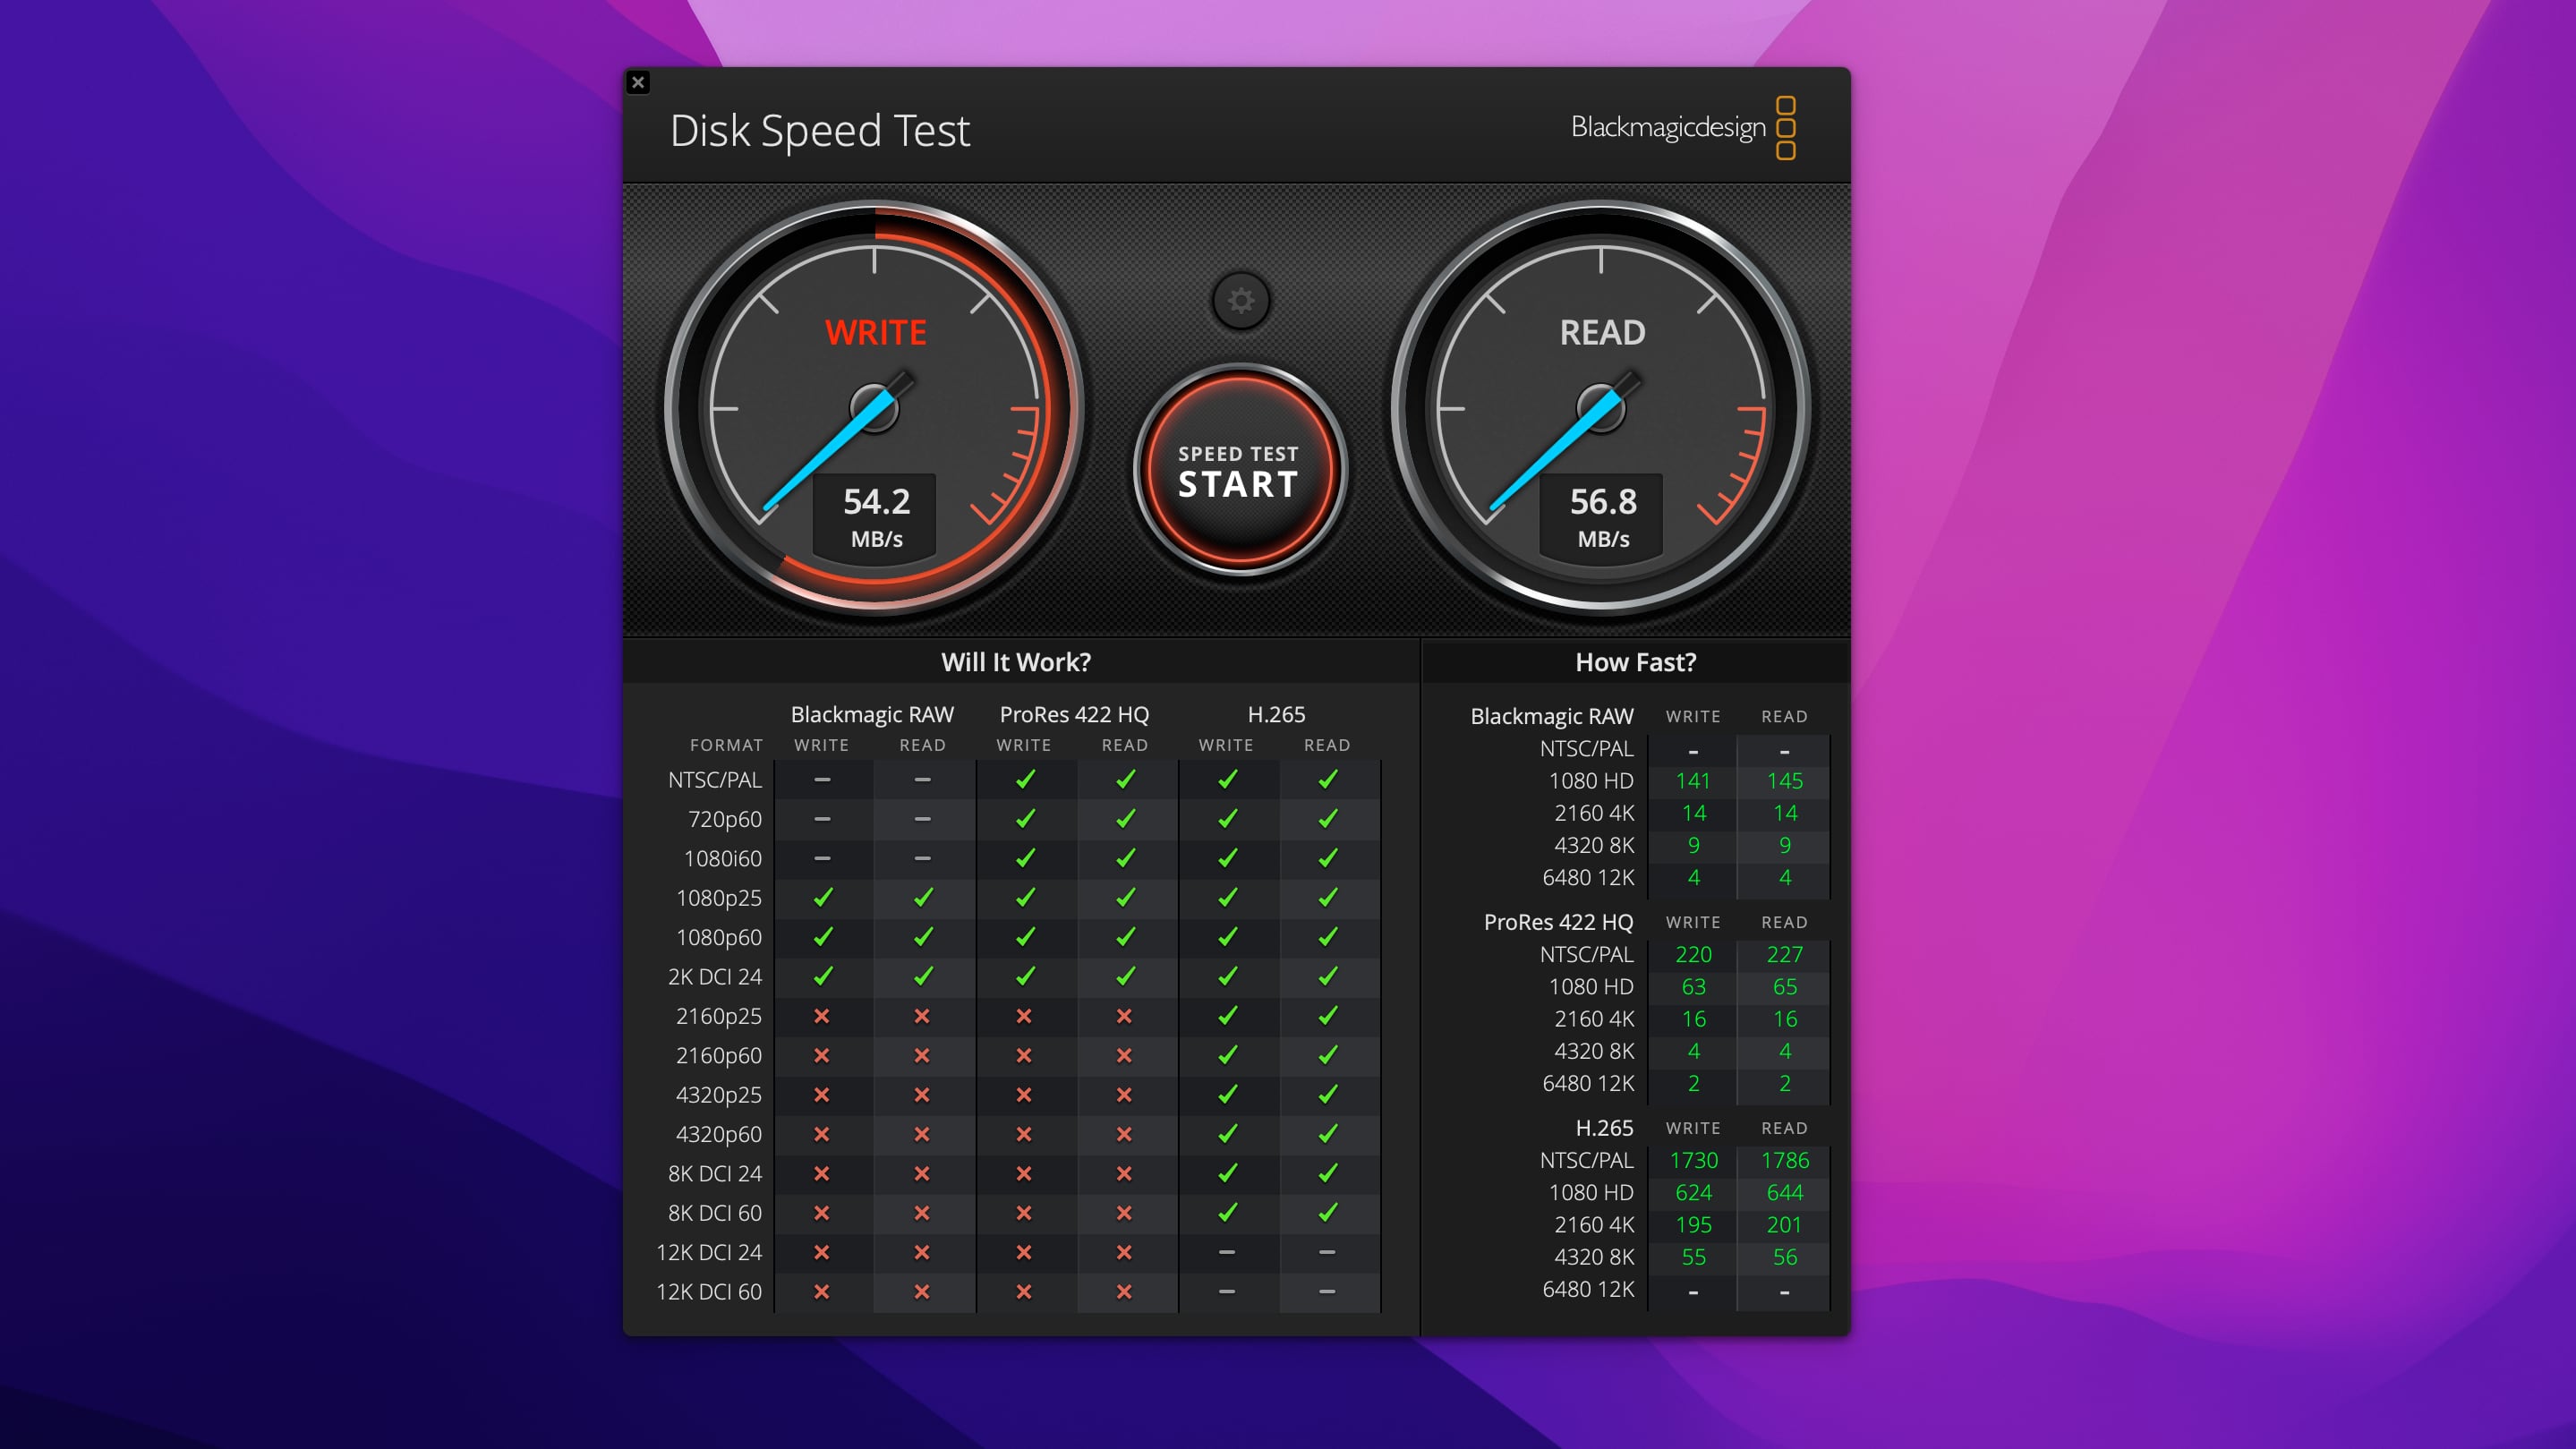 Test results from Blackmagic's Disk Speed app for 1TB Western Digital SATA drive in the DockCase enclosure